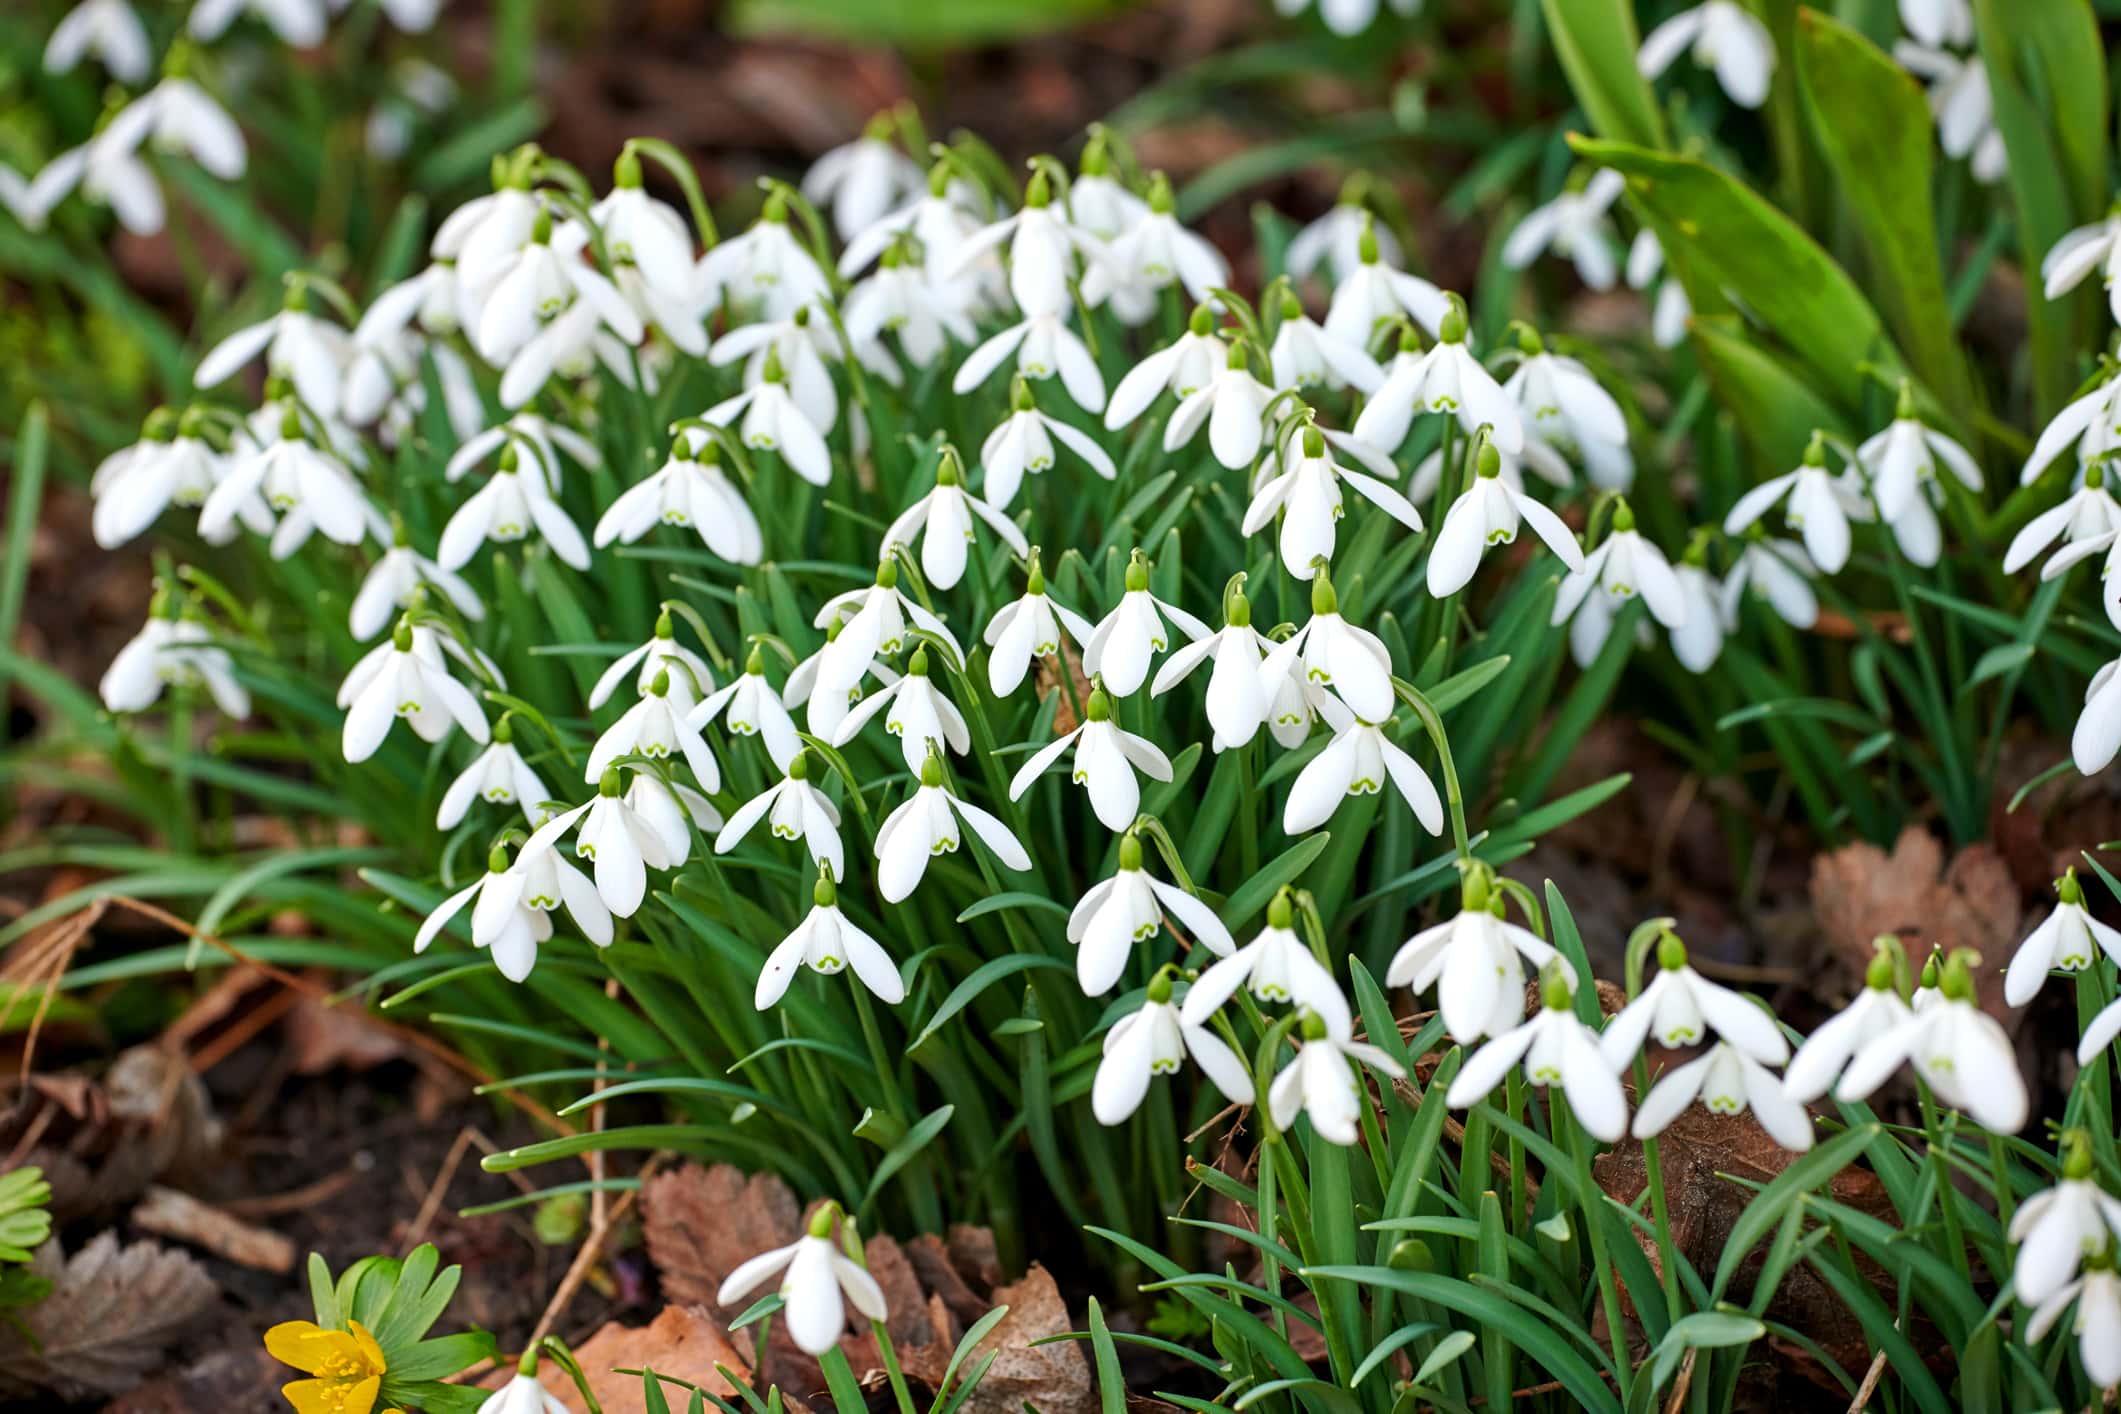 Galanthus nivalis was described by the Swedish botanist Carl Linnaeus in his Species Plantarum in 1753, and given the specific epithet nivalis, meaning snowy (Galanthus means with milk-white flowers).